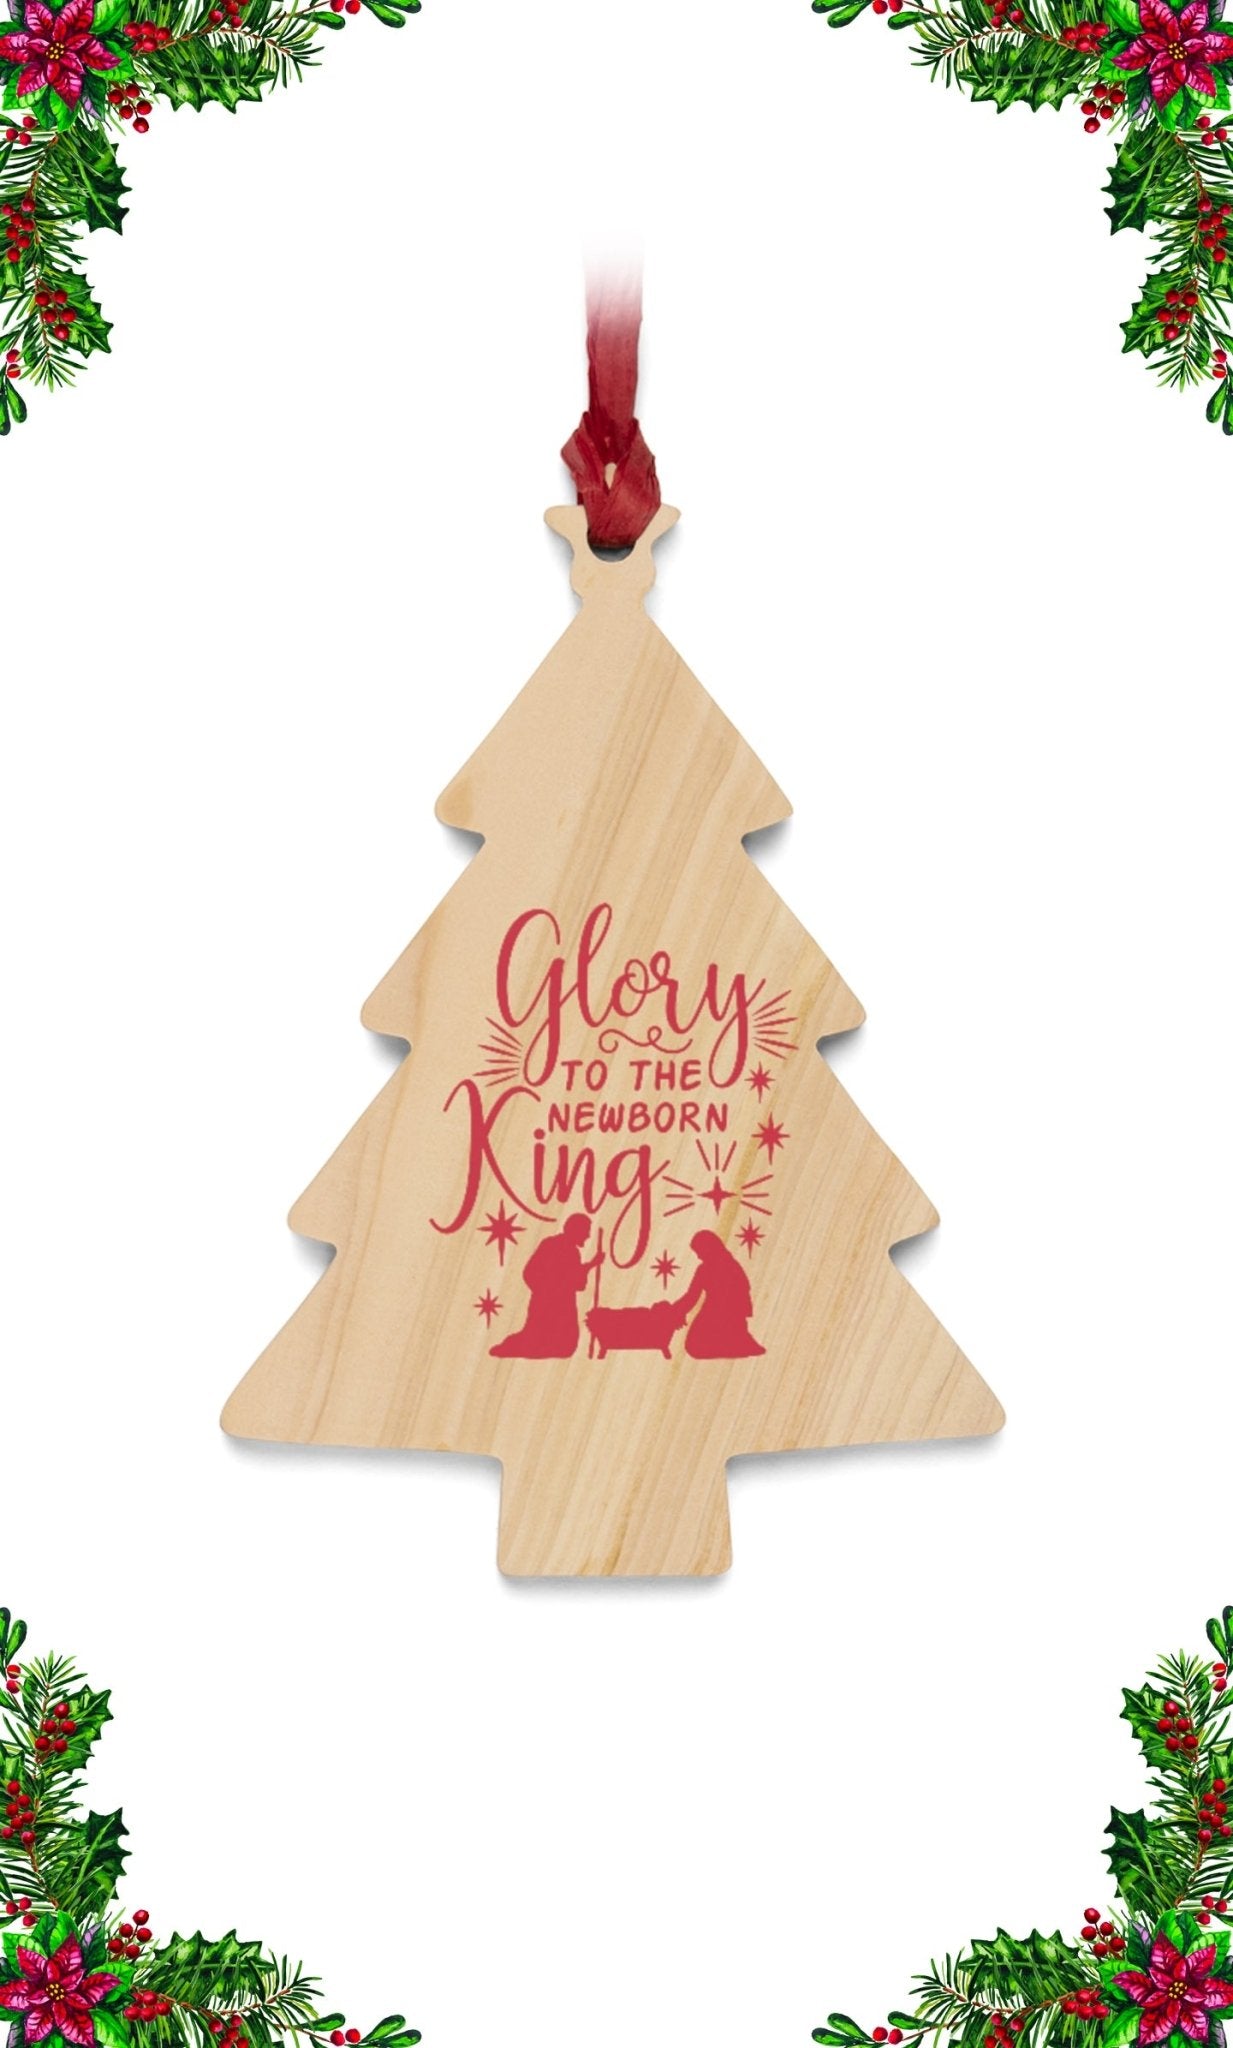 Glory to the King - Wooden Ornaments - Trini-T Ministries